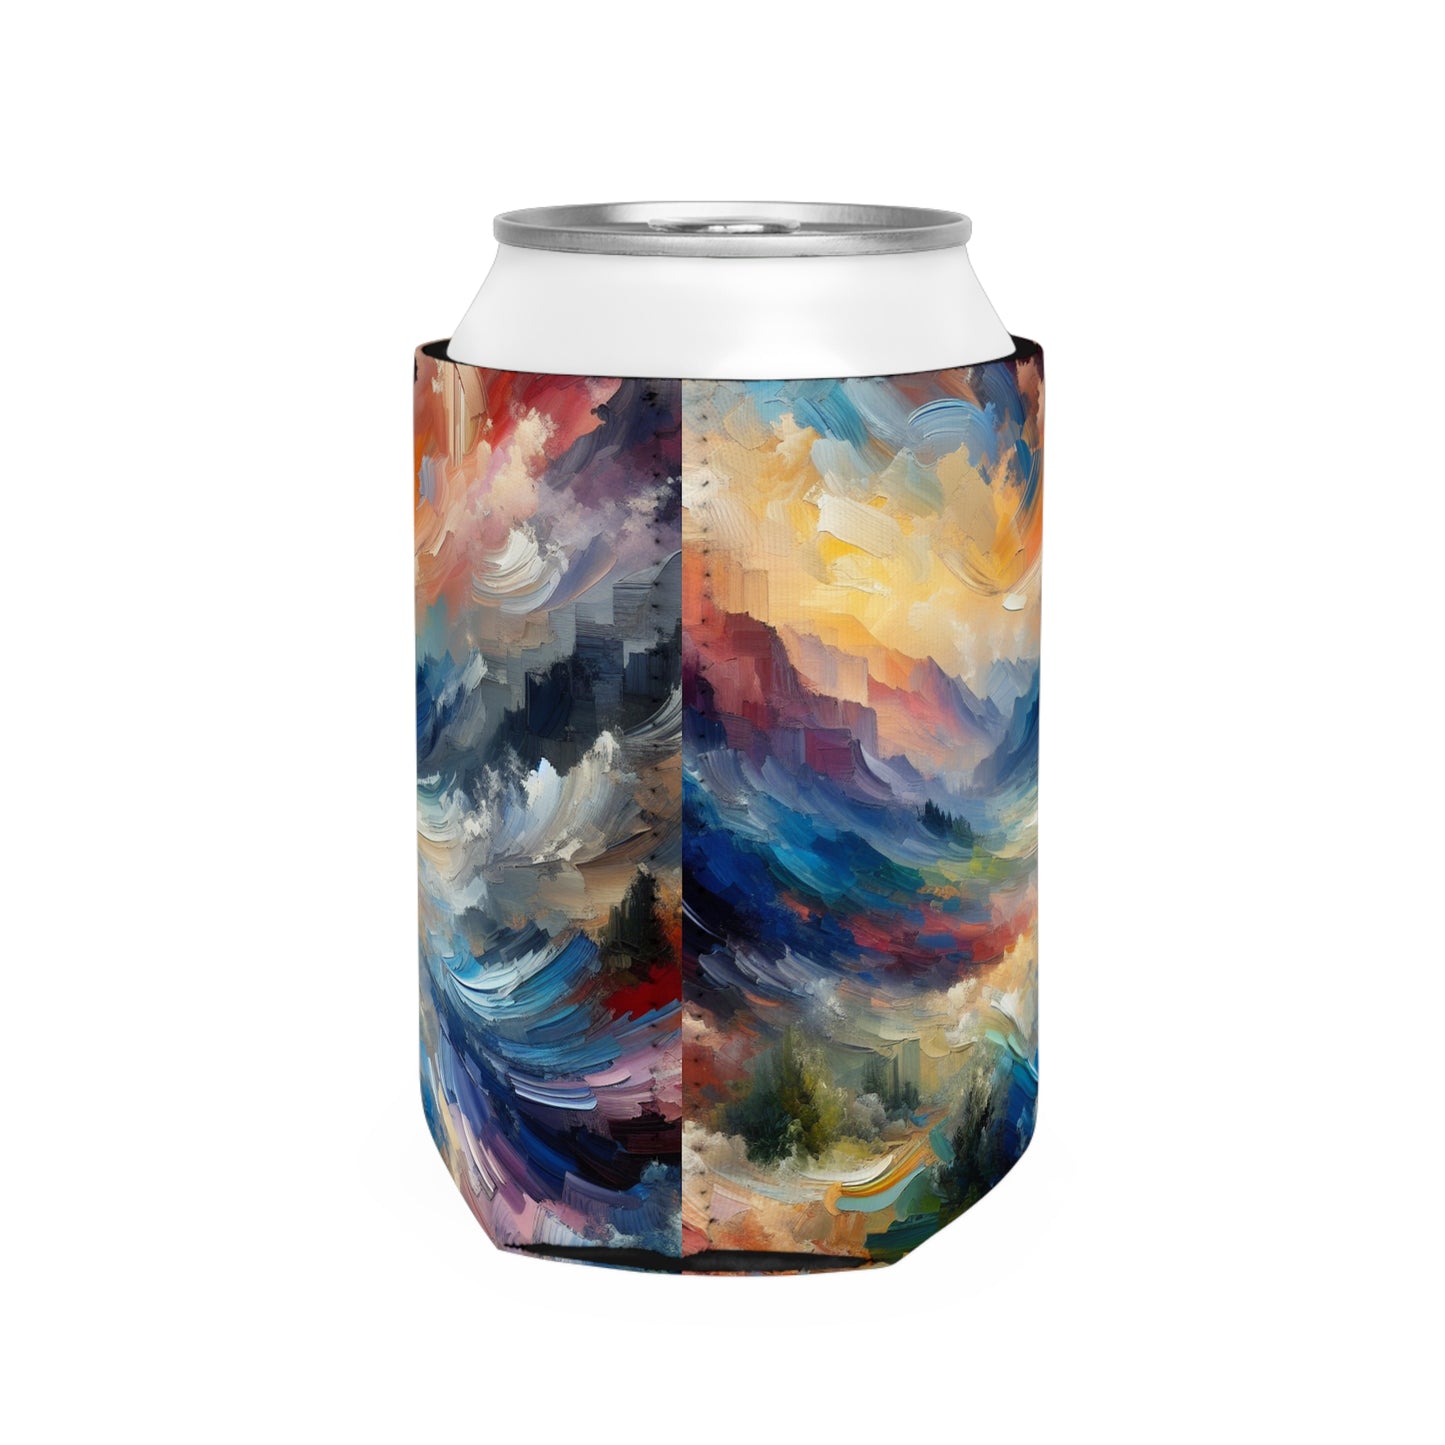 "Abstract Landscape: Exploring Emotional Depths Through Color & Texture" - The Alien Can Cooler Sleeve Abstract Expressionism Style